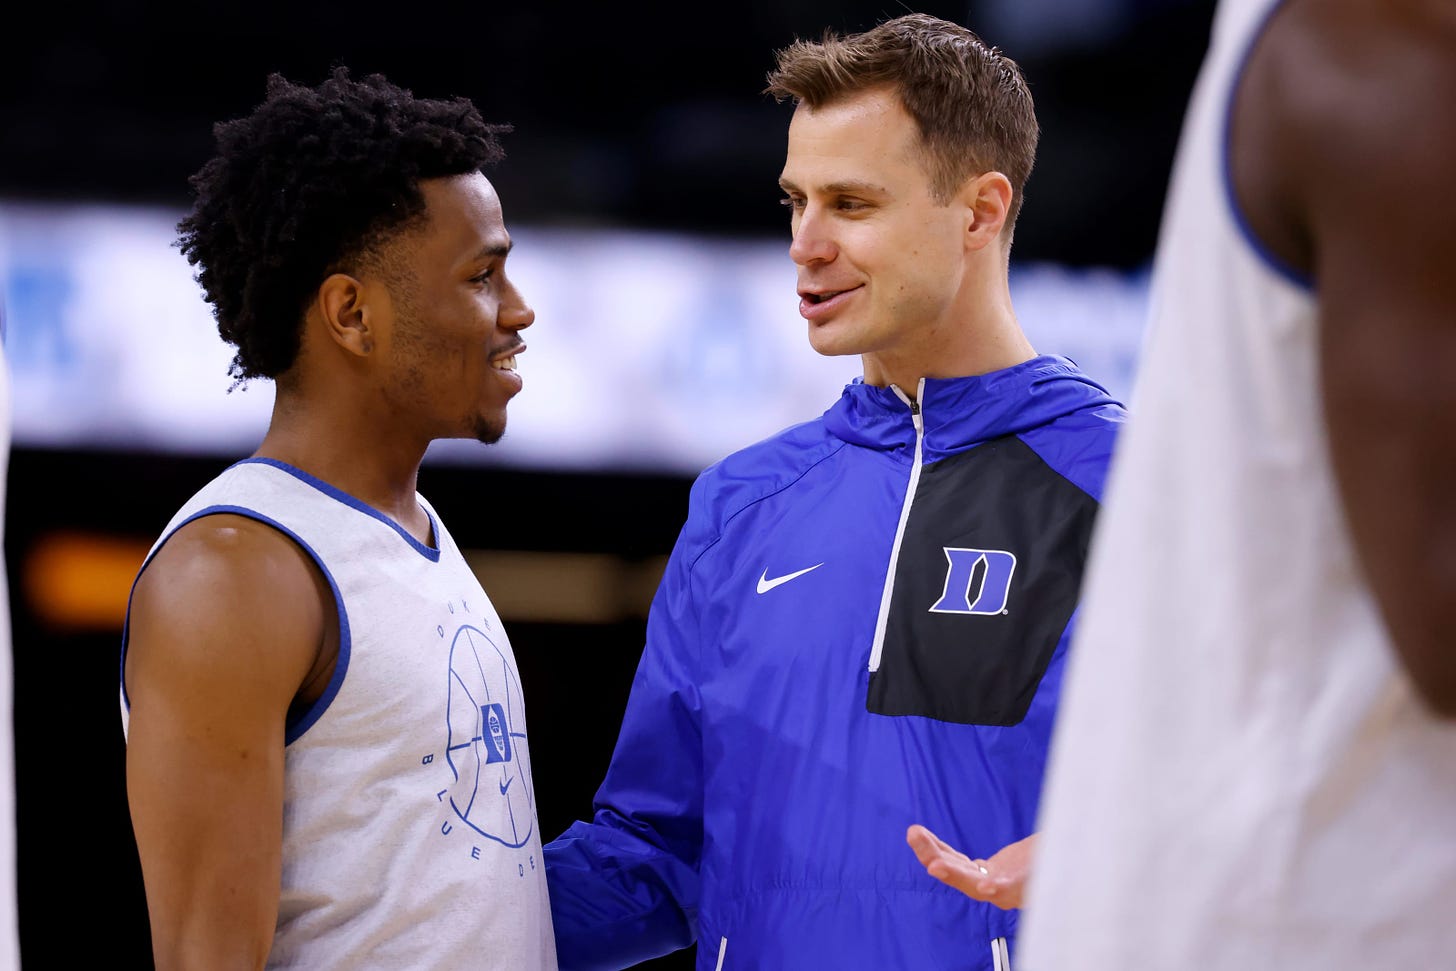 Duke Basketball: Projected rotation and minutes for 2022-23 season